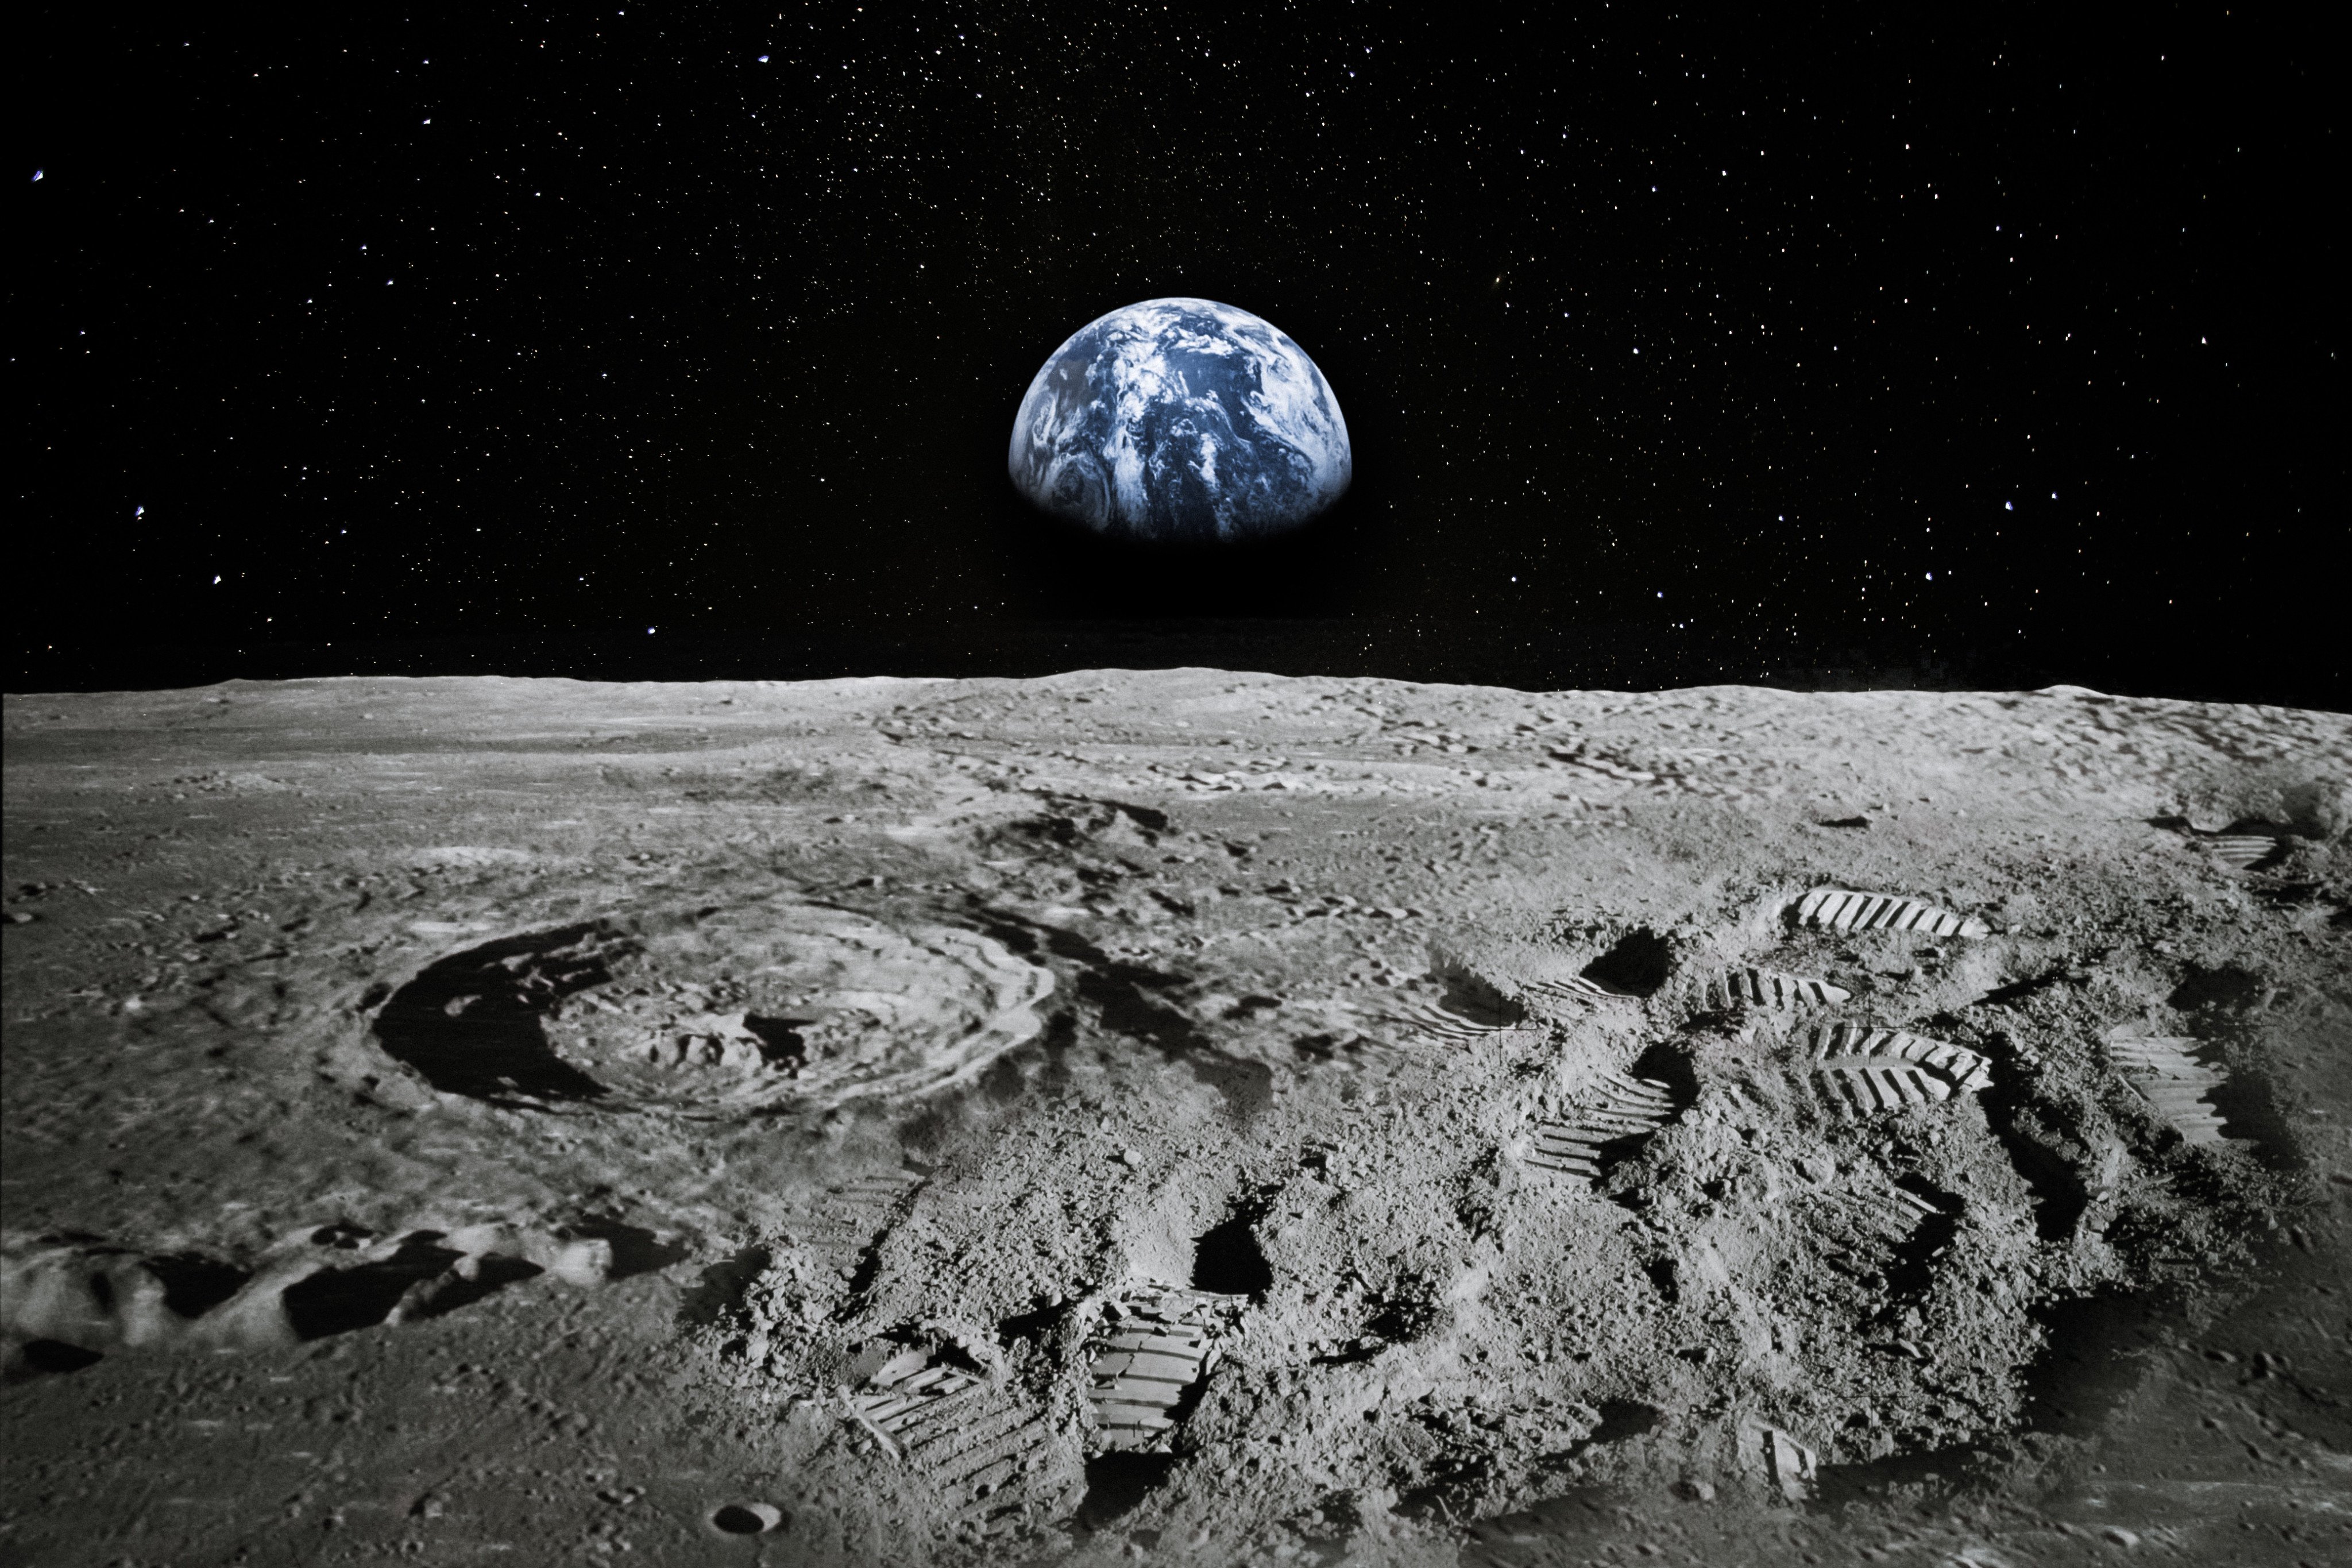 China hopes to evenutally build a base on the moon. Photo: Shutterstock
